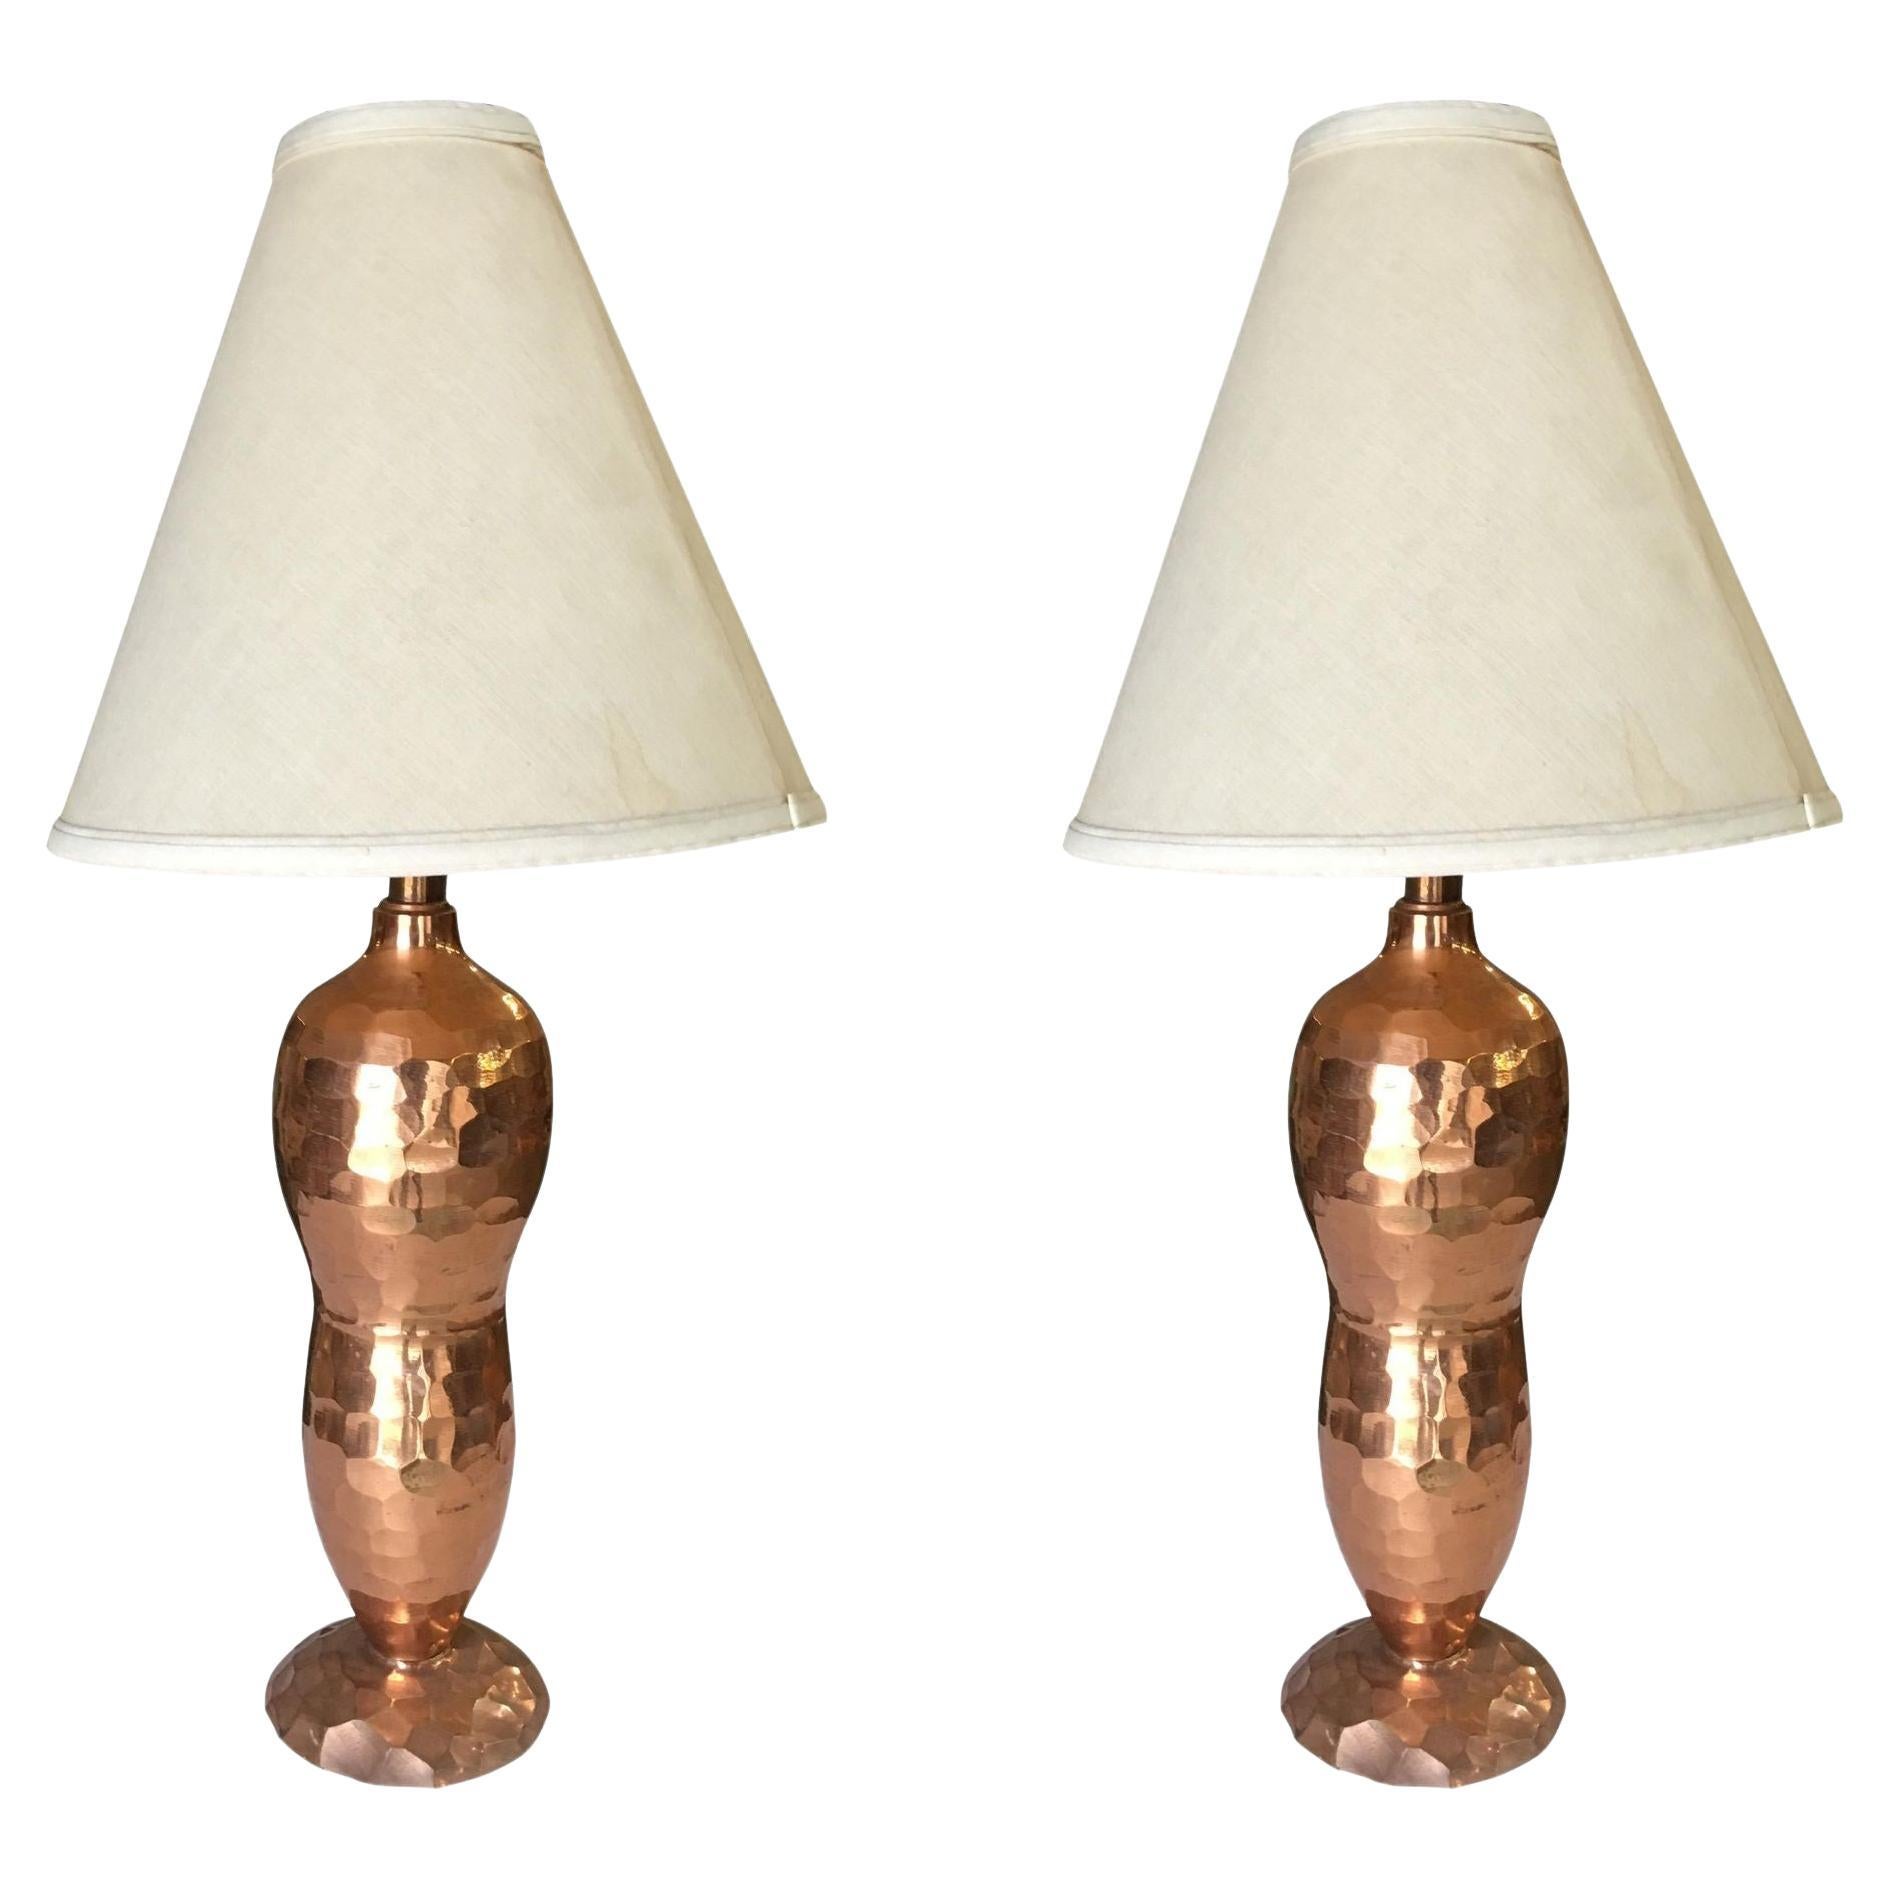 Mission Inspired Hand-Hammered Peanut Shaped Copper Lamp, Pair For Sale